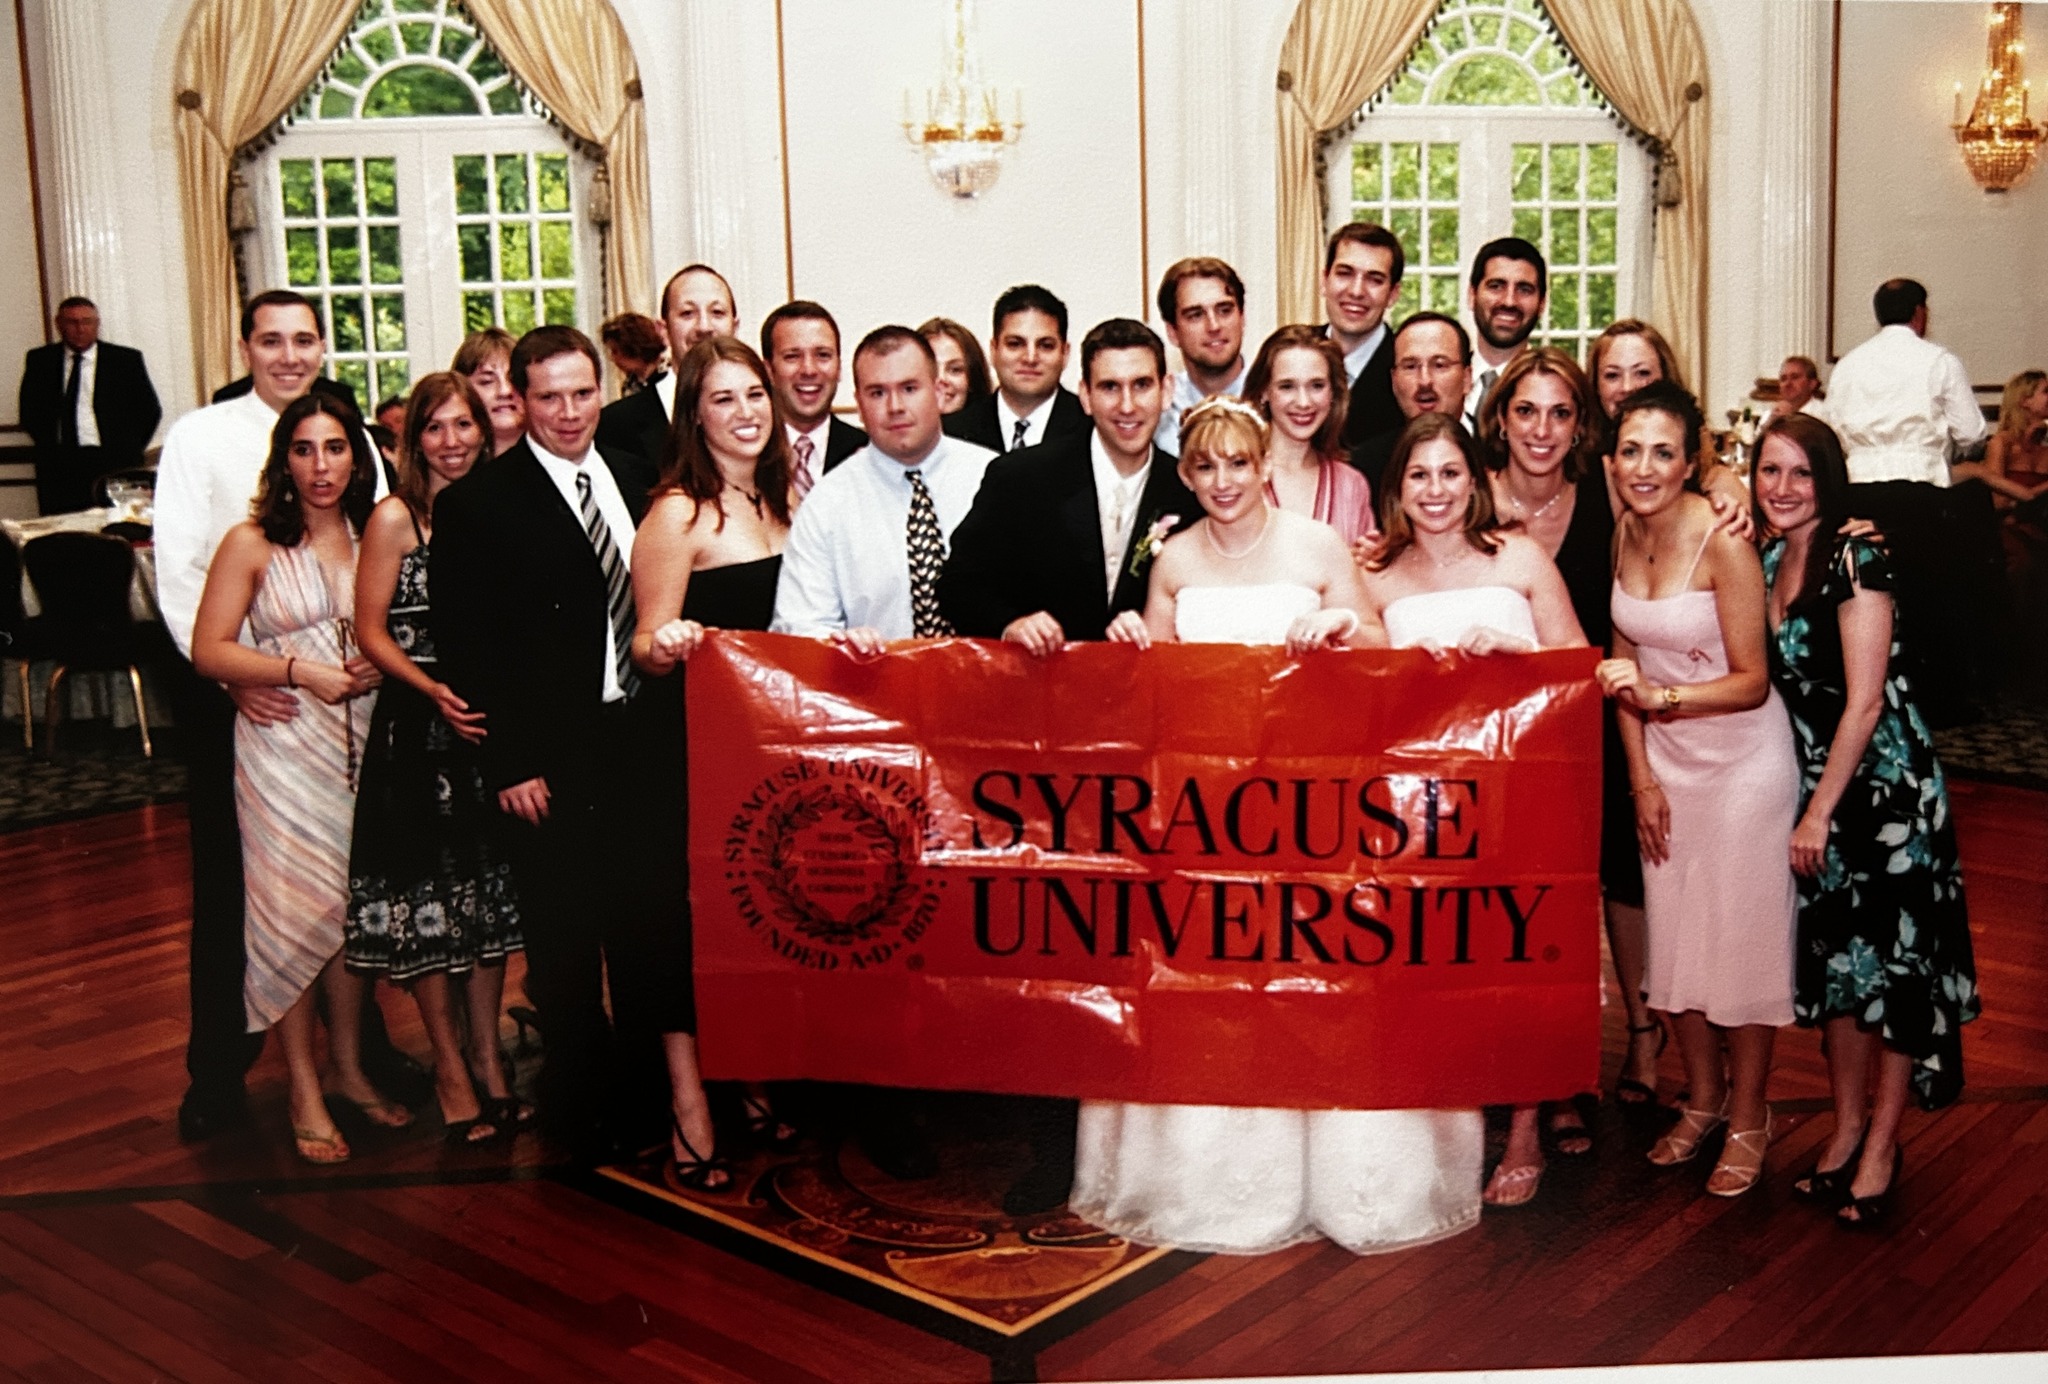 Large group of people standing together at a wedding holding a Syracuse University banner